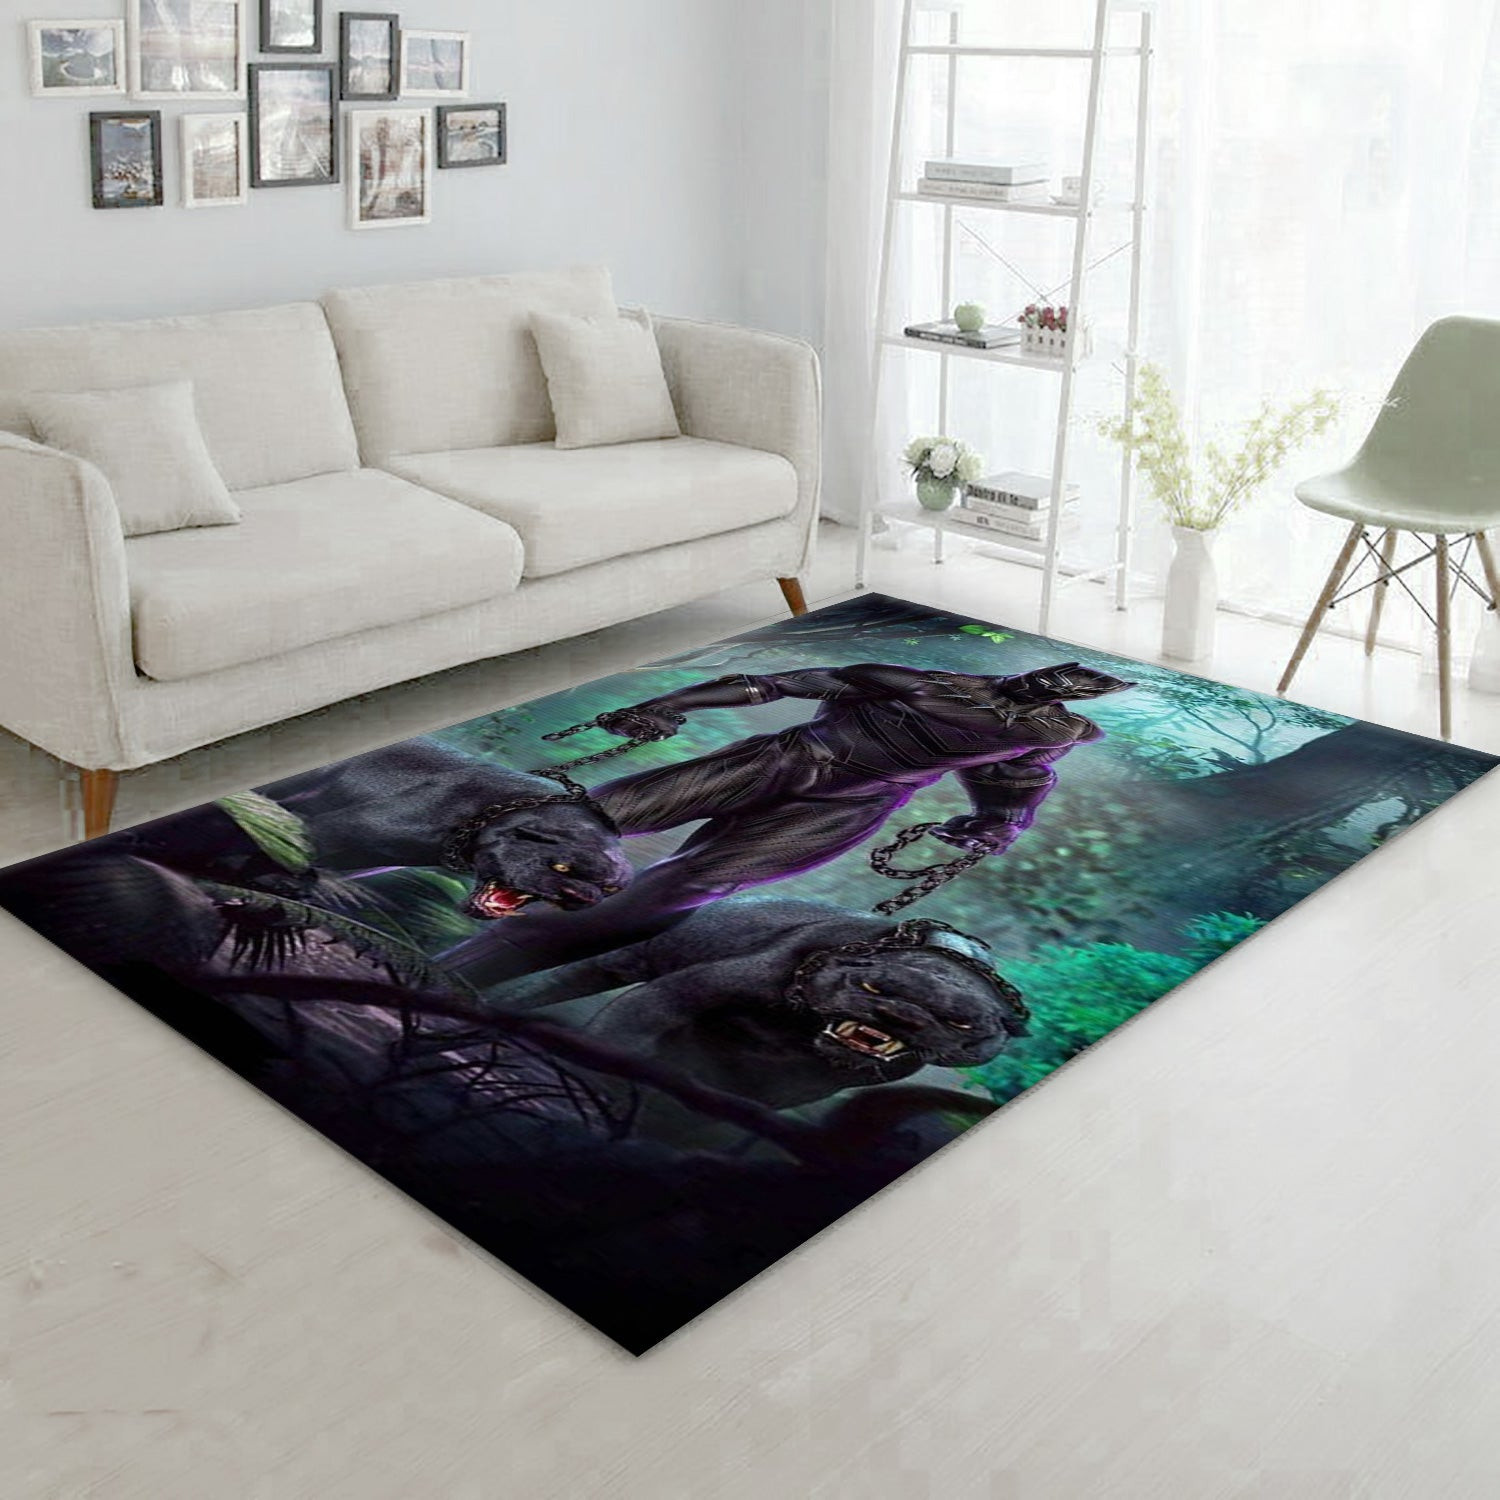 Black Panther Ver4 Movie Area Rug, Living Room Rug - Home Decor - Indoor Outdoor Rugs